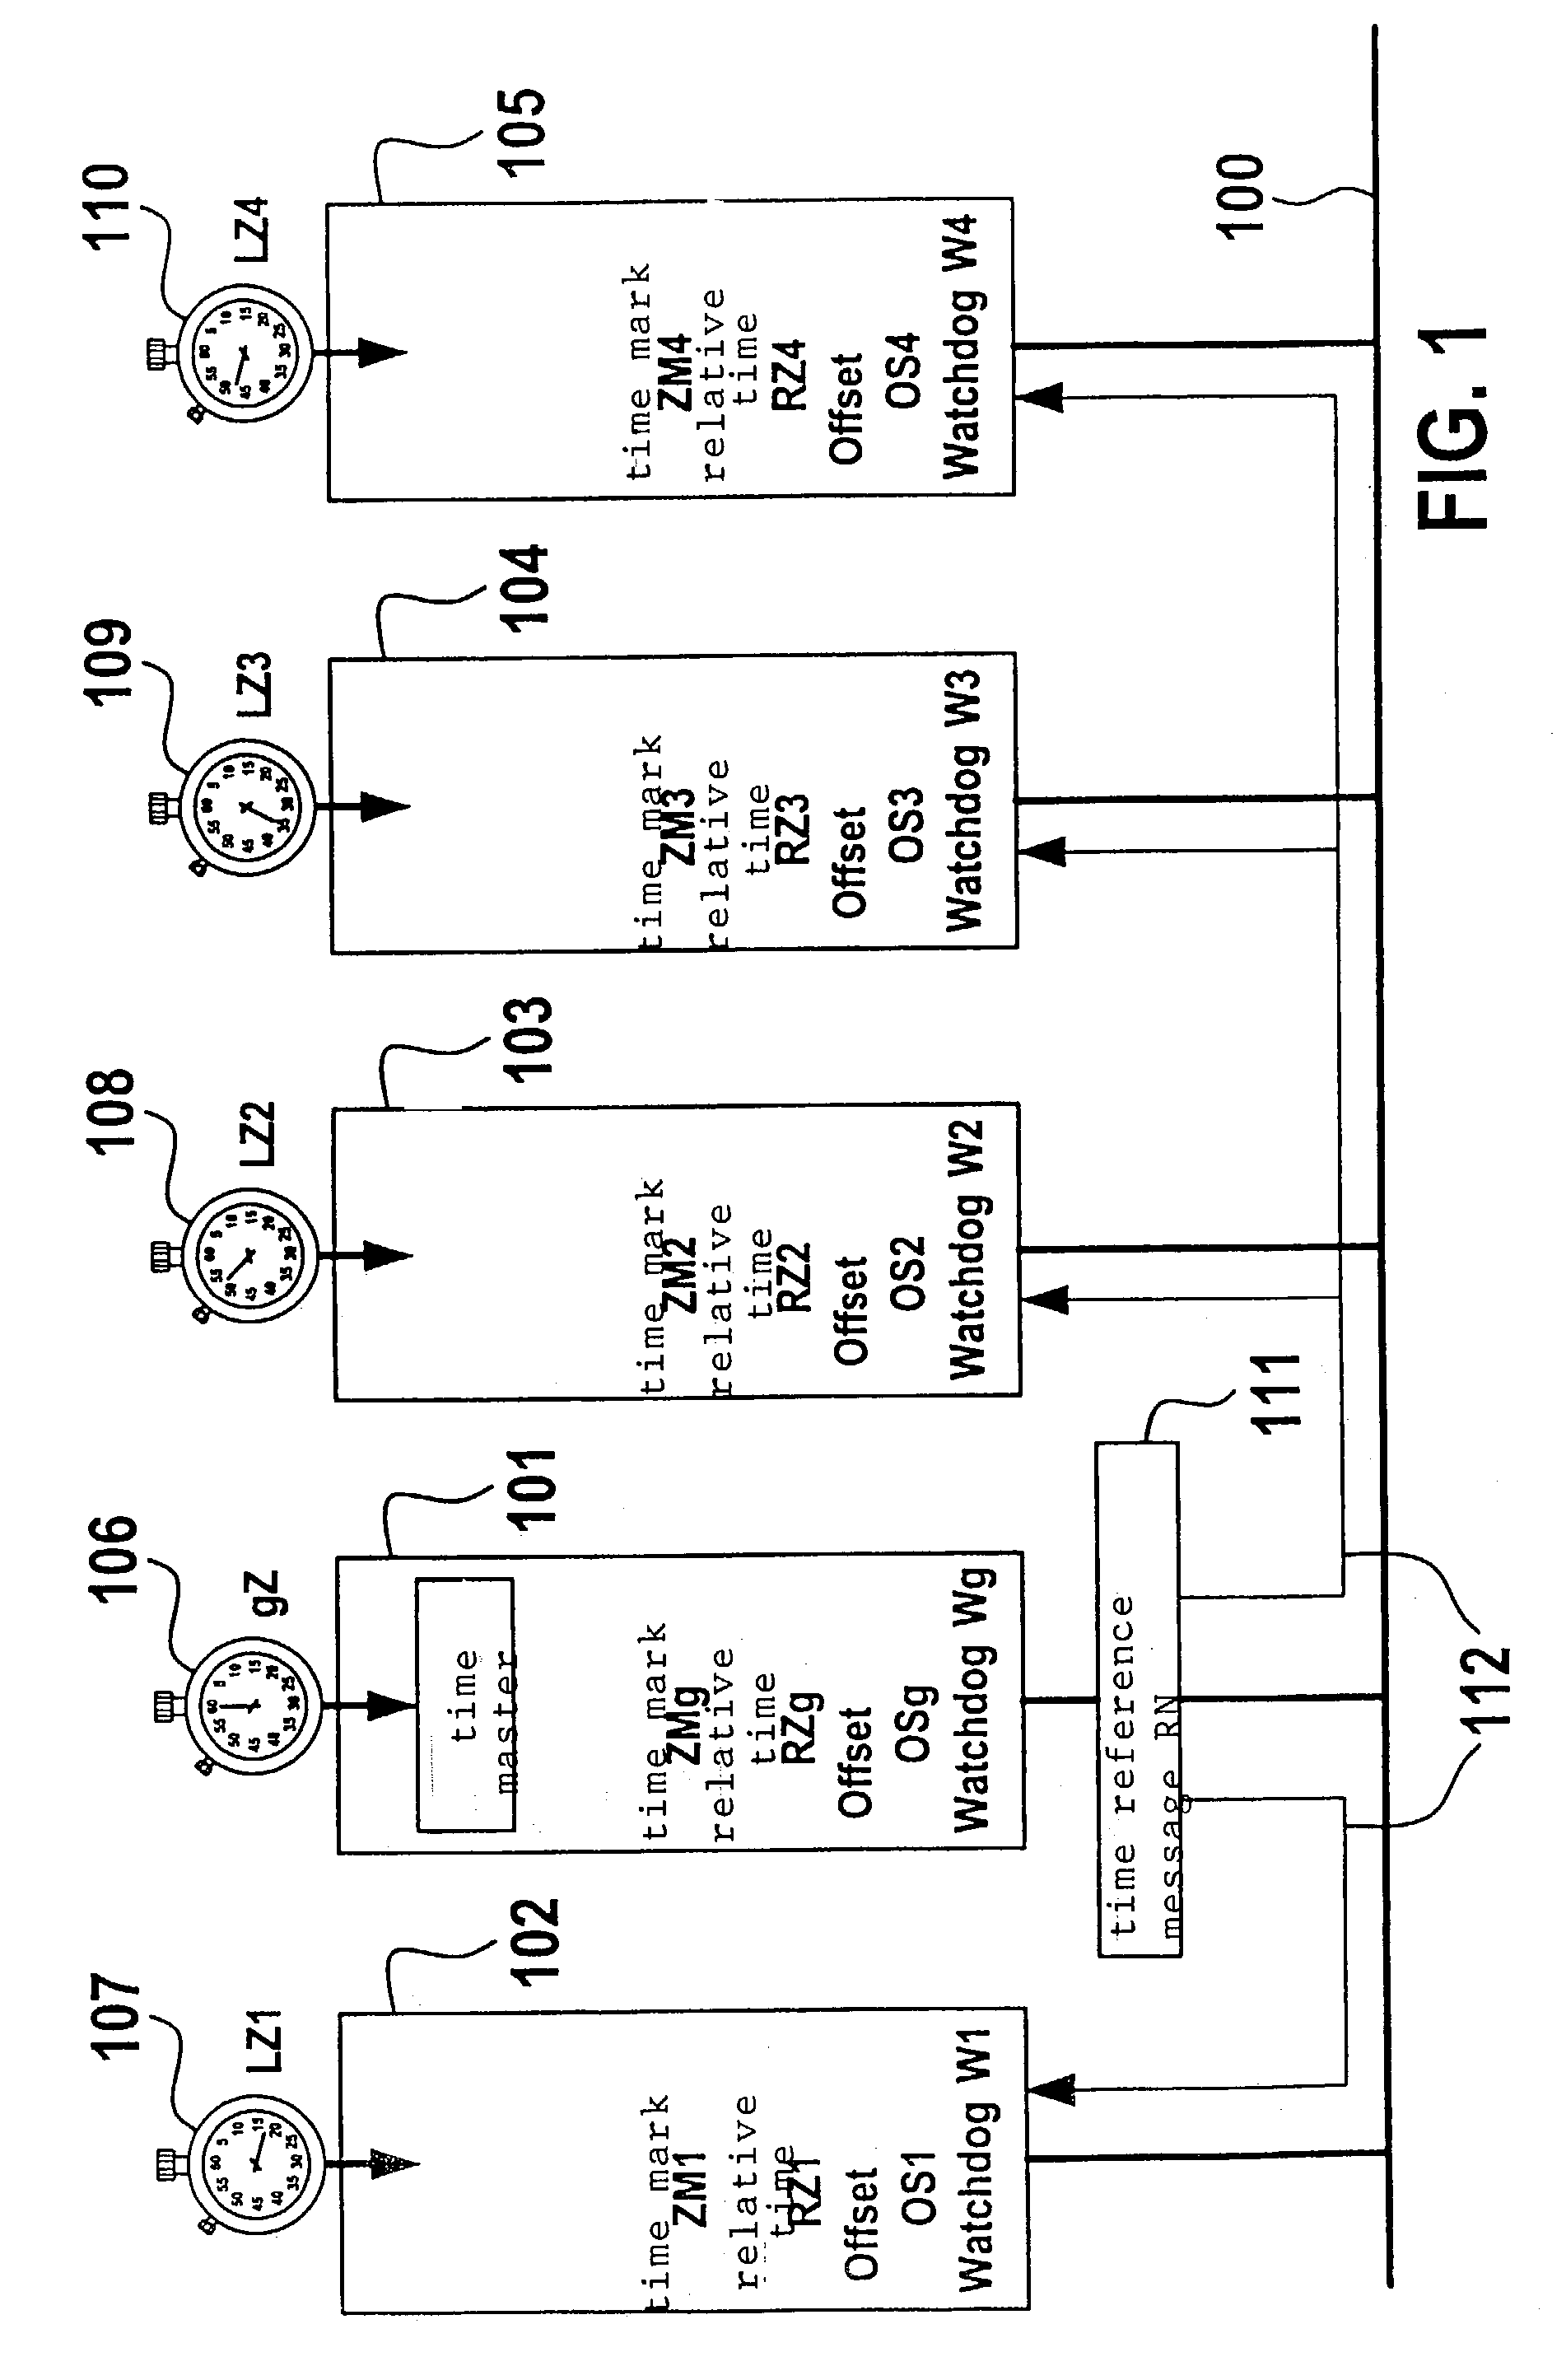 Method and device for exchanging data between at least two stations connected via a bus system